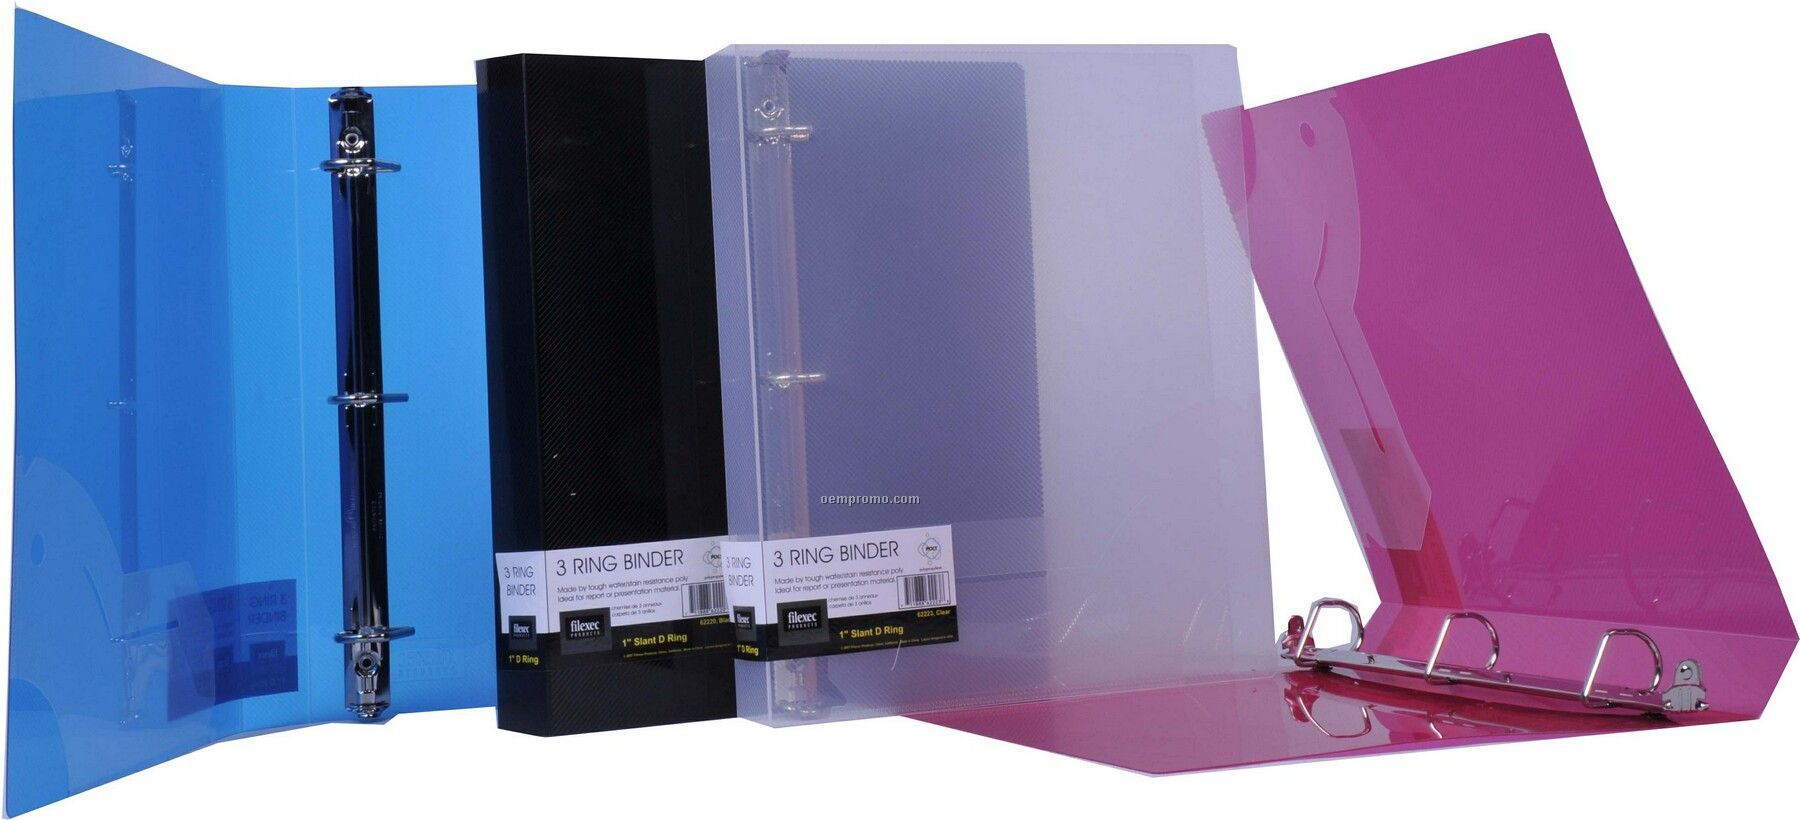 Translucent Black D-ring Binder With 1" Ring